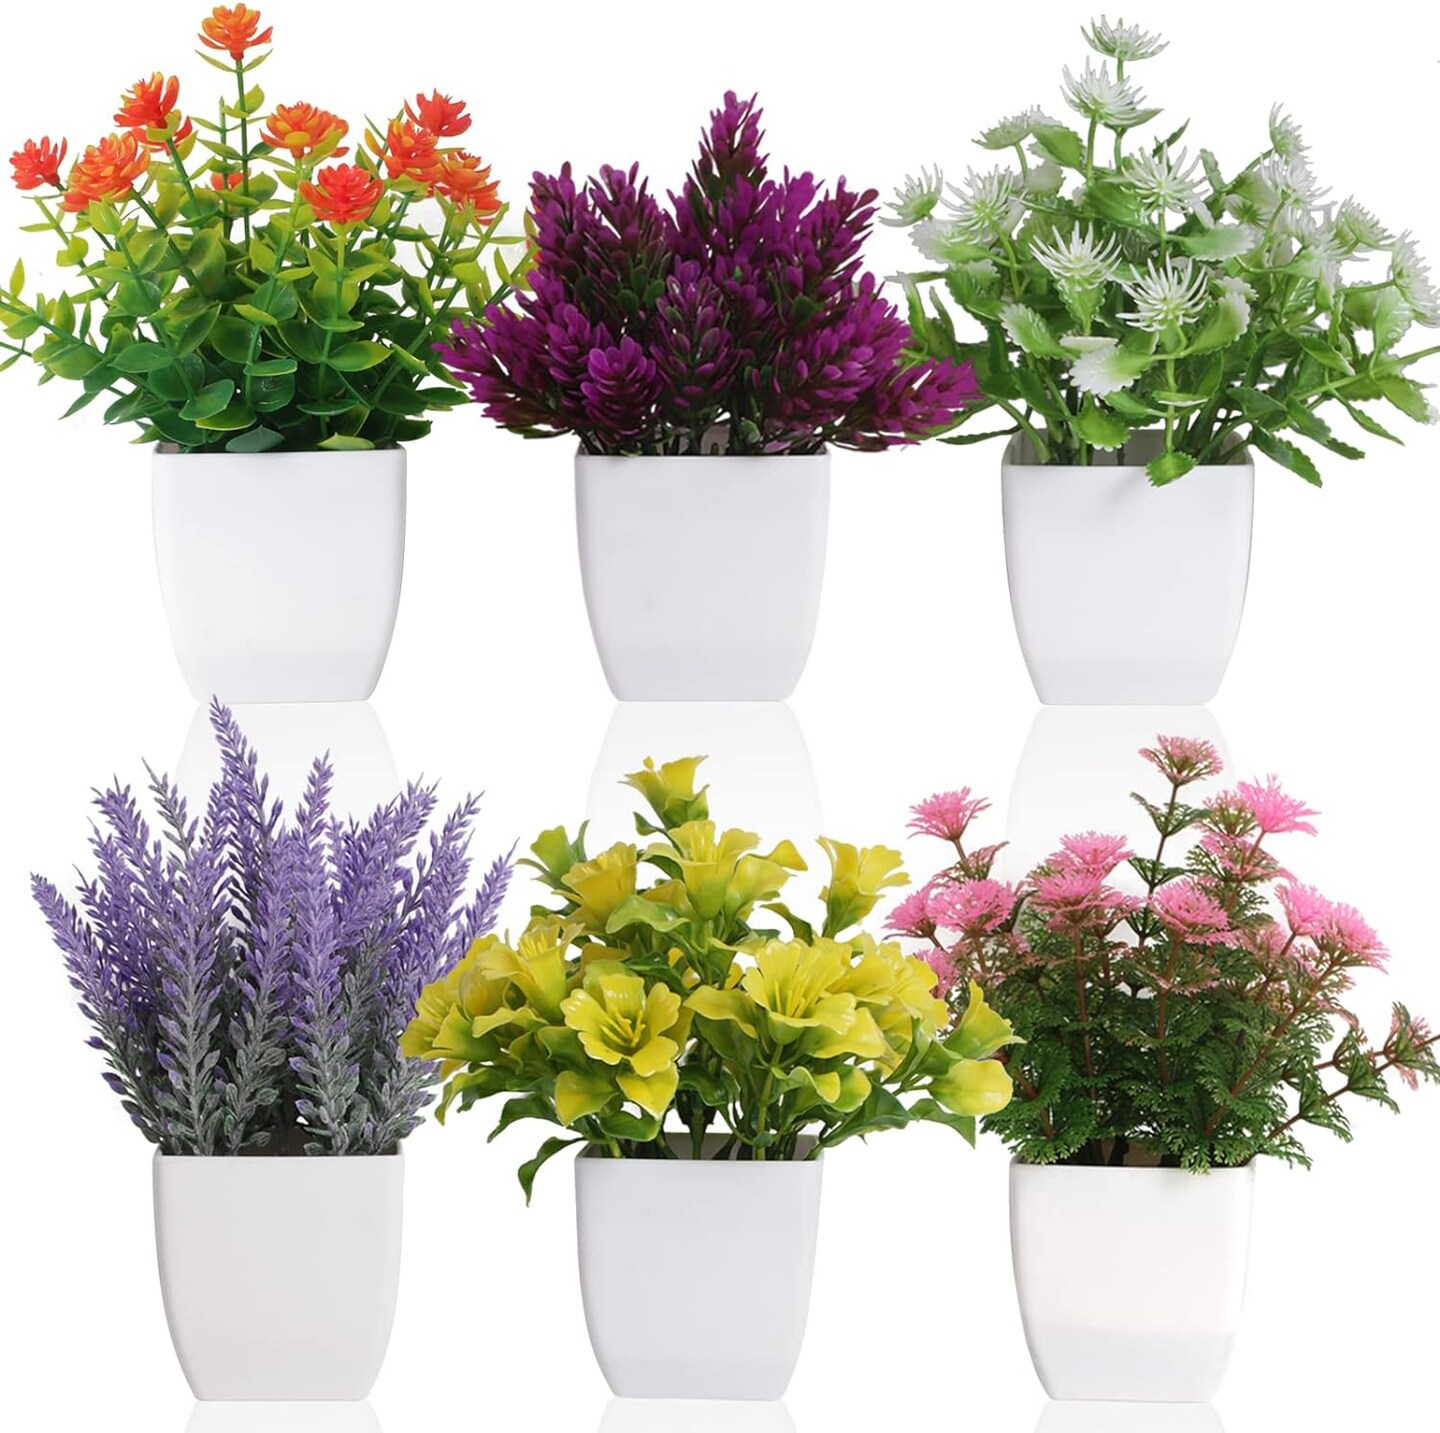 6-Pieces Small Artificial Potted Flowers, Mini Fake Plants for Home and Office Decor